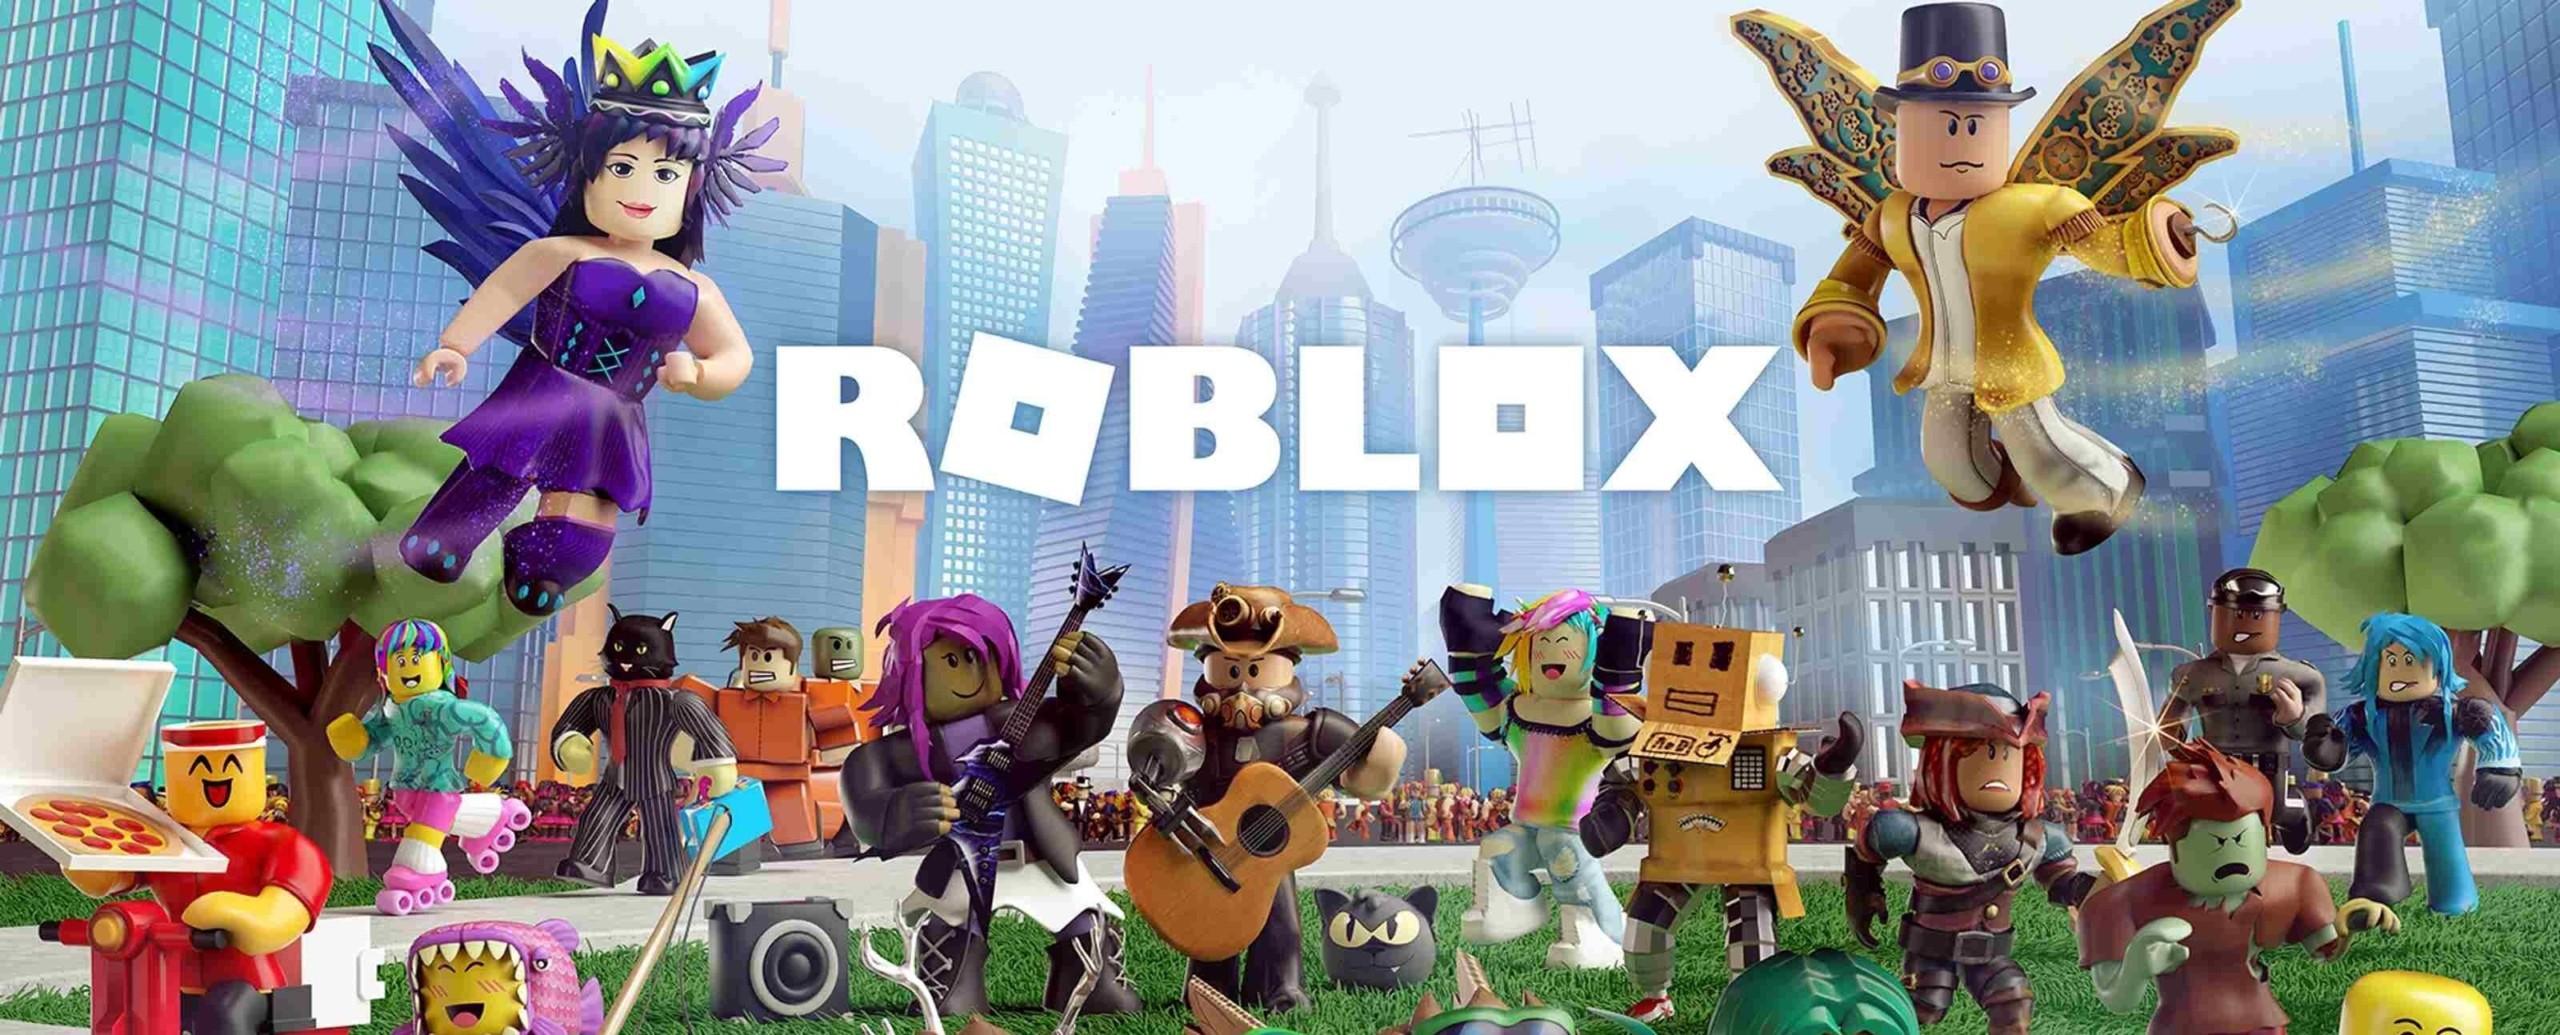 Game Design with Roblox